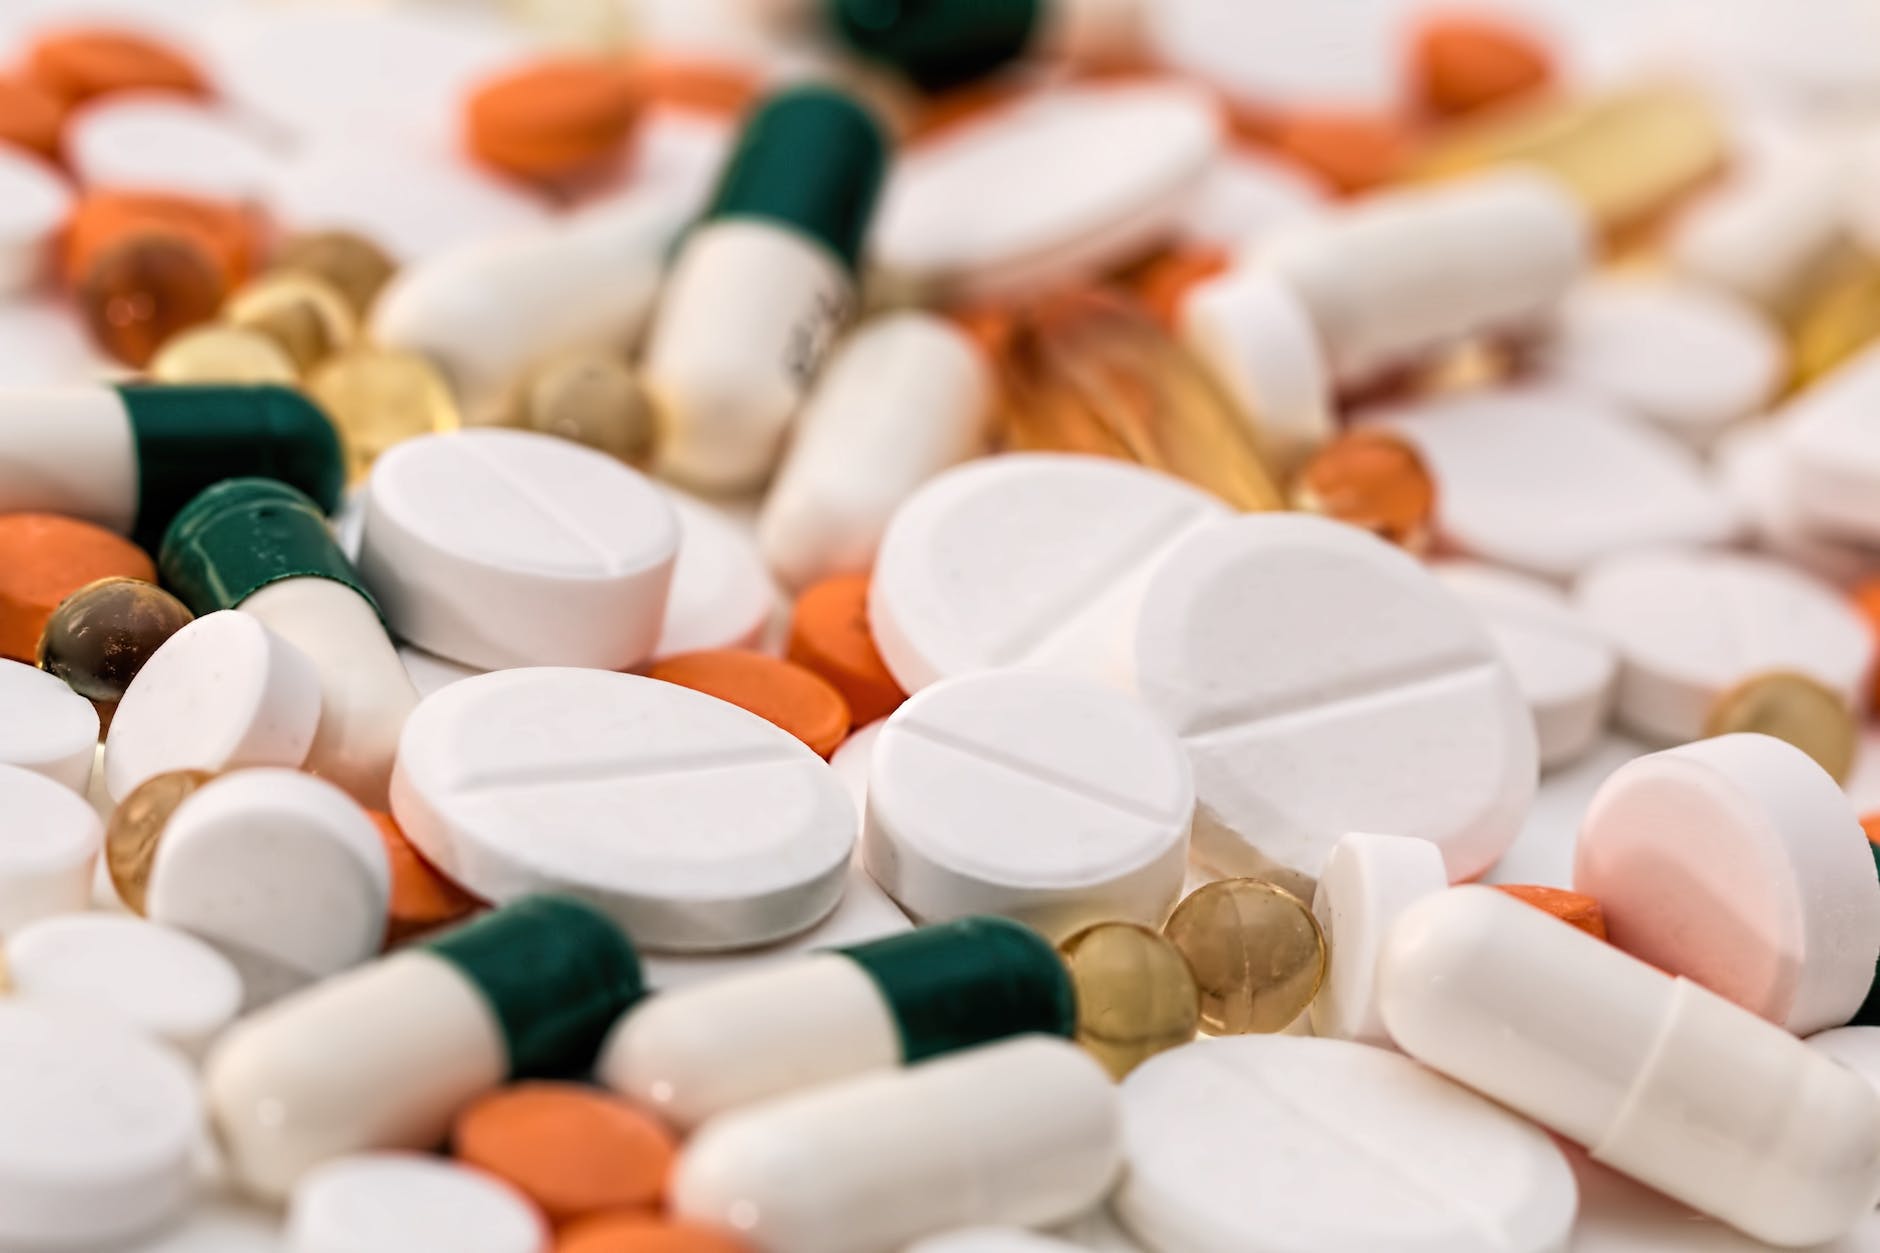 FDA reports: Americans face “Adderall” shortage